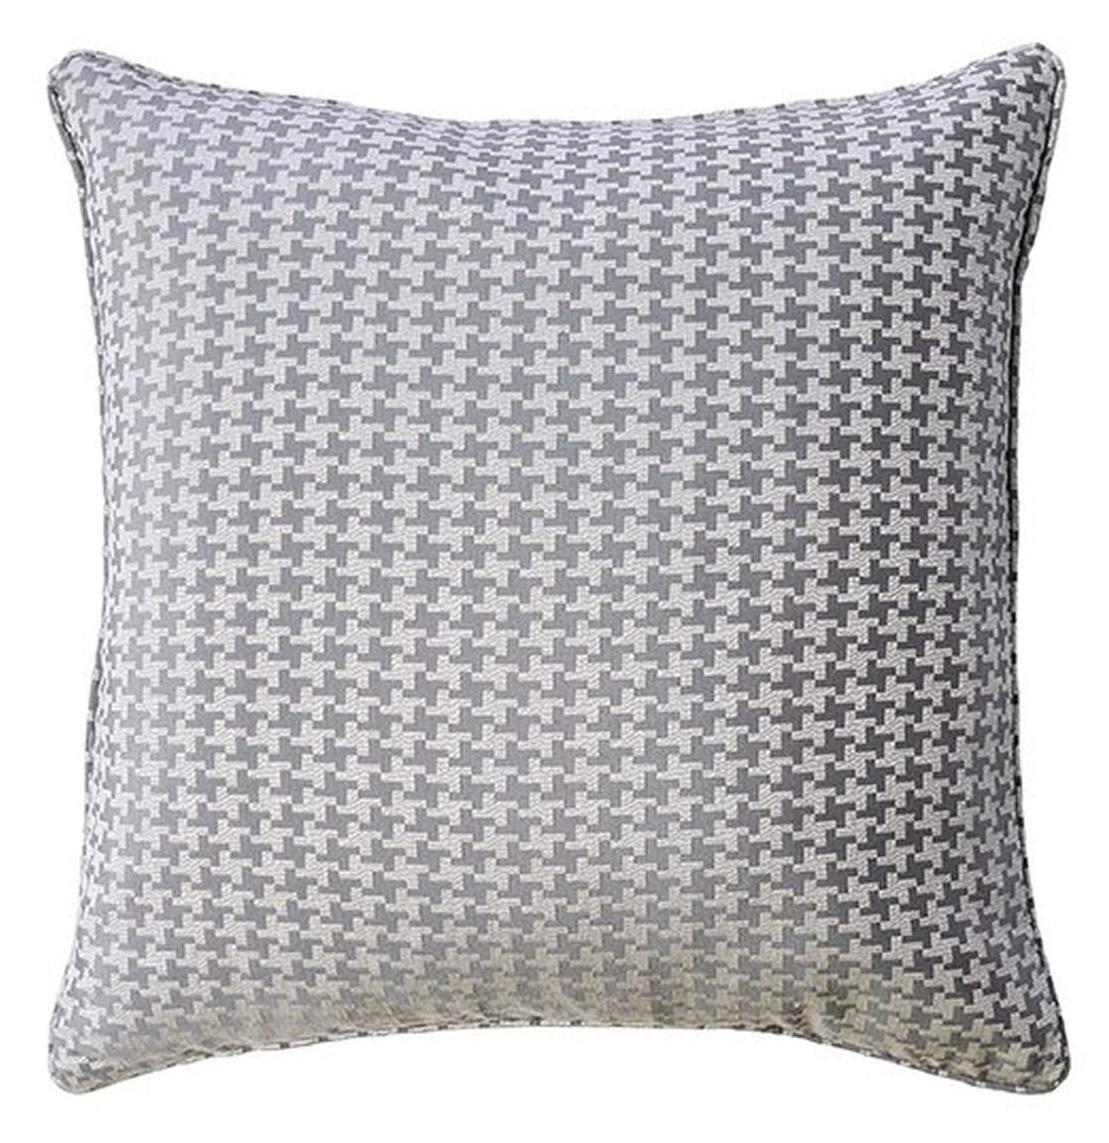 Contemporary Throw Pillow PL8020 Jan PL8020 in Gray 